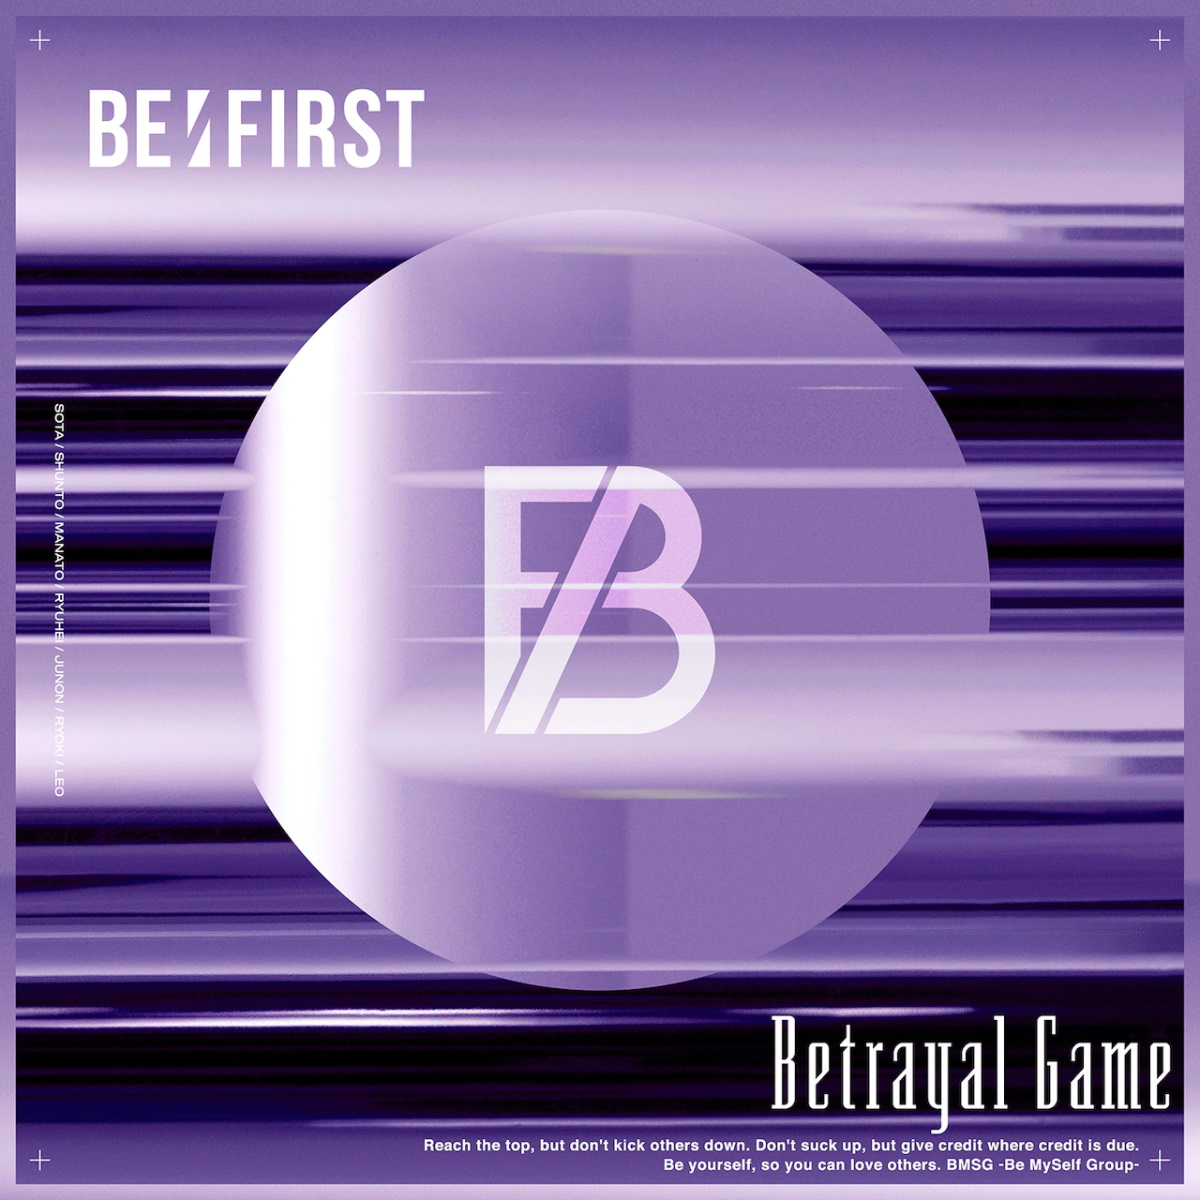 Cover for『BE:FIRST - Betrayal Game』from the release『Betrayal Game』